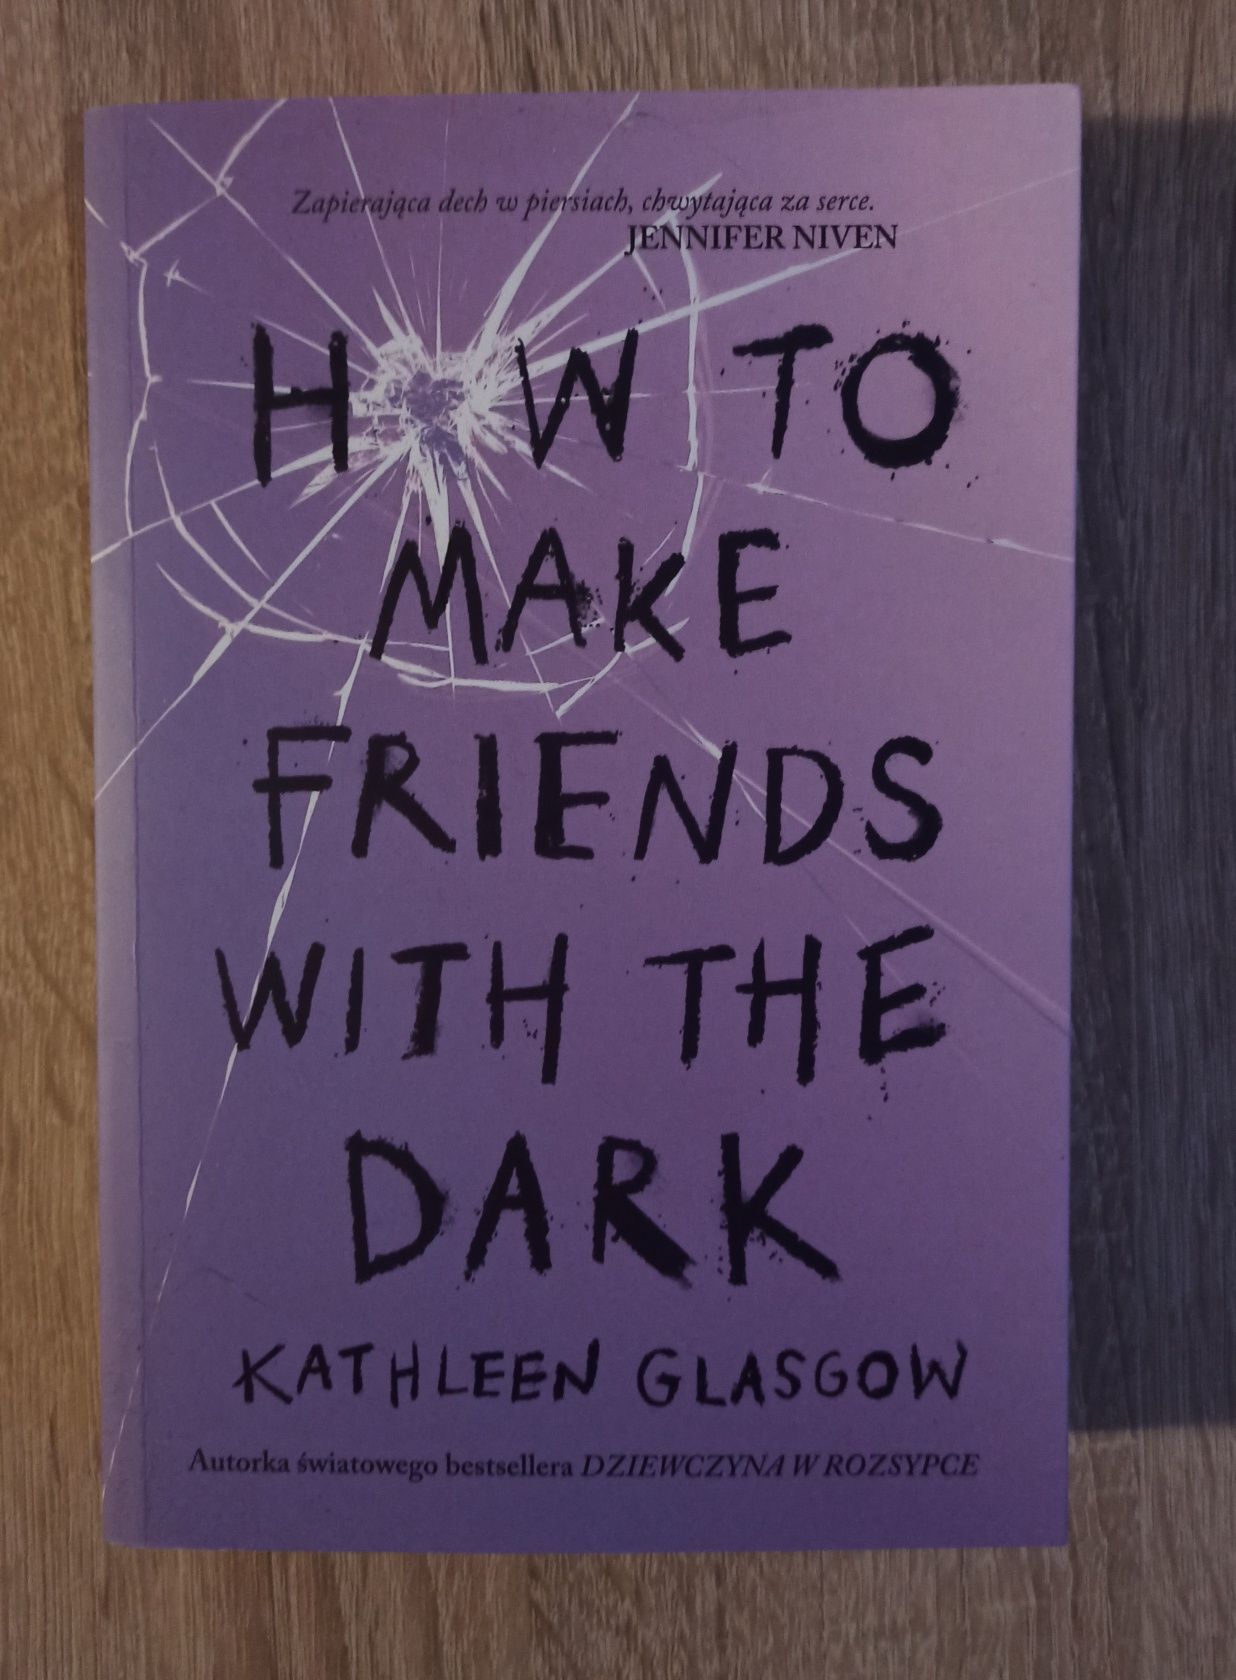 "How to make friends with the dark" Kathleen Glasgow